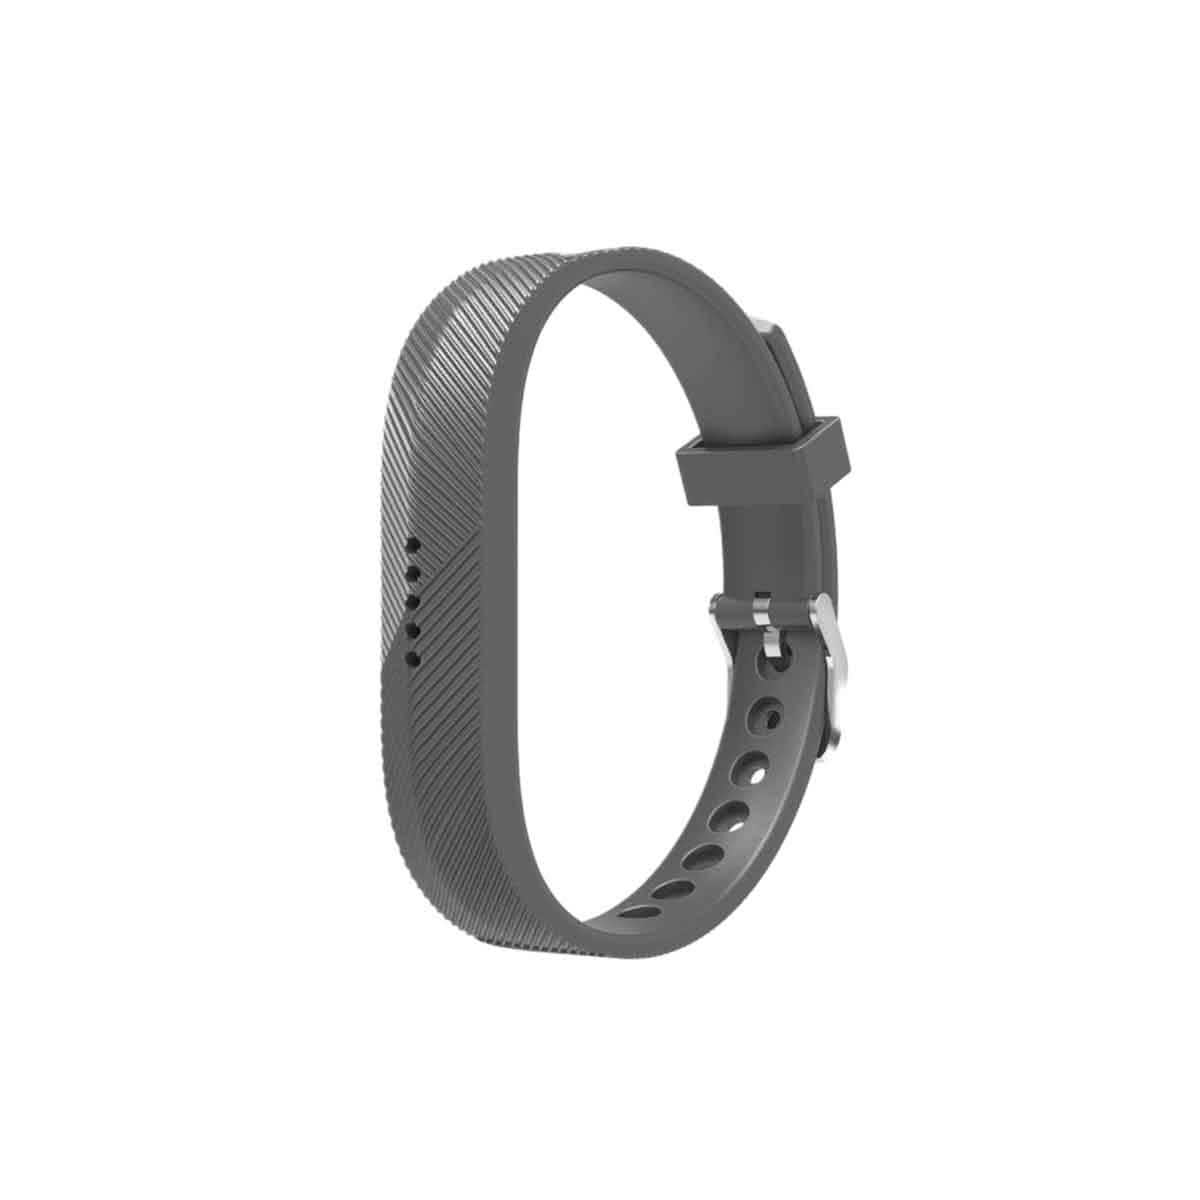 Secure Fitbit Flex 2 Band Replacement Strap with Buckle Grey  